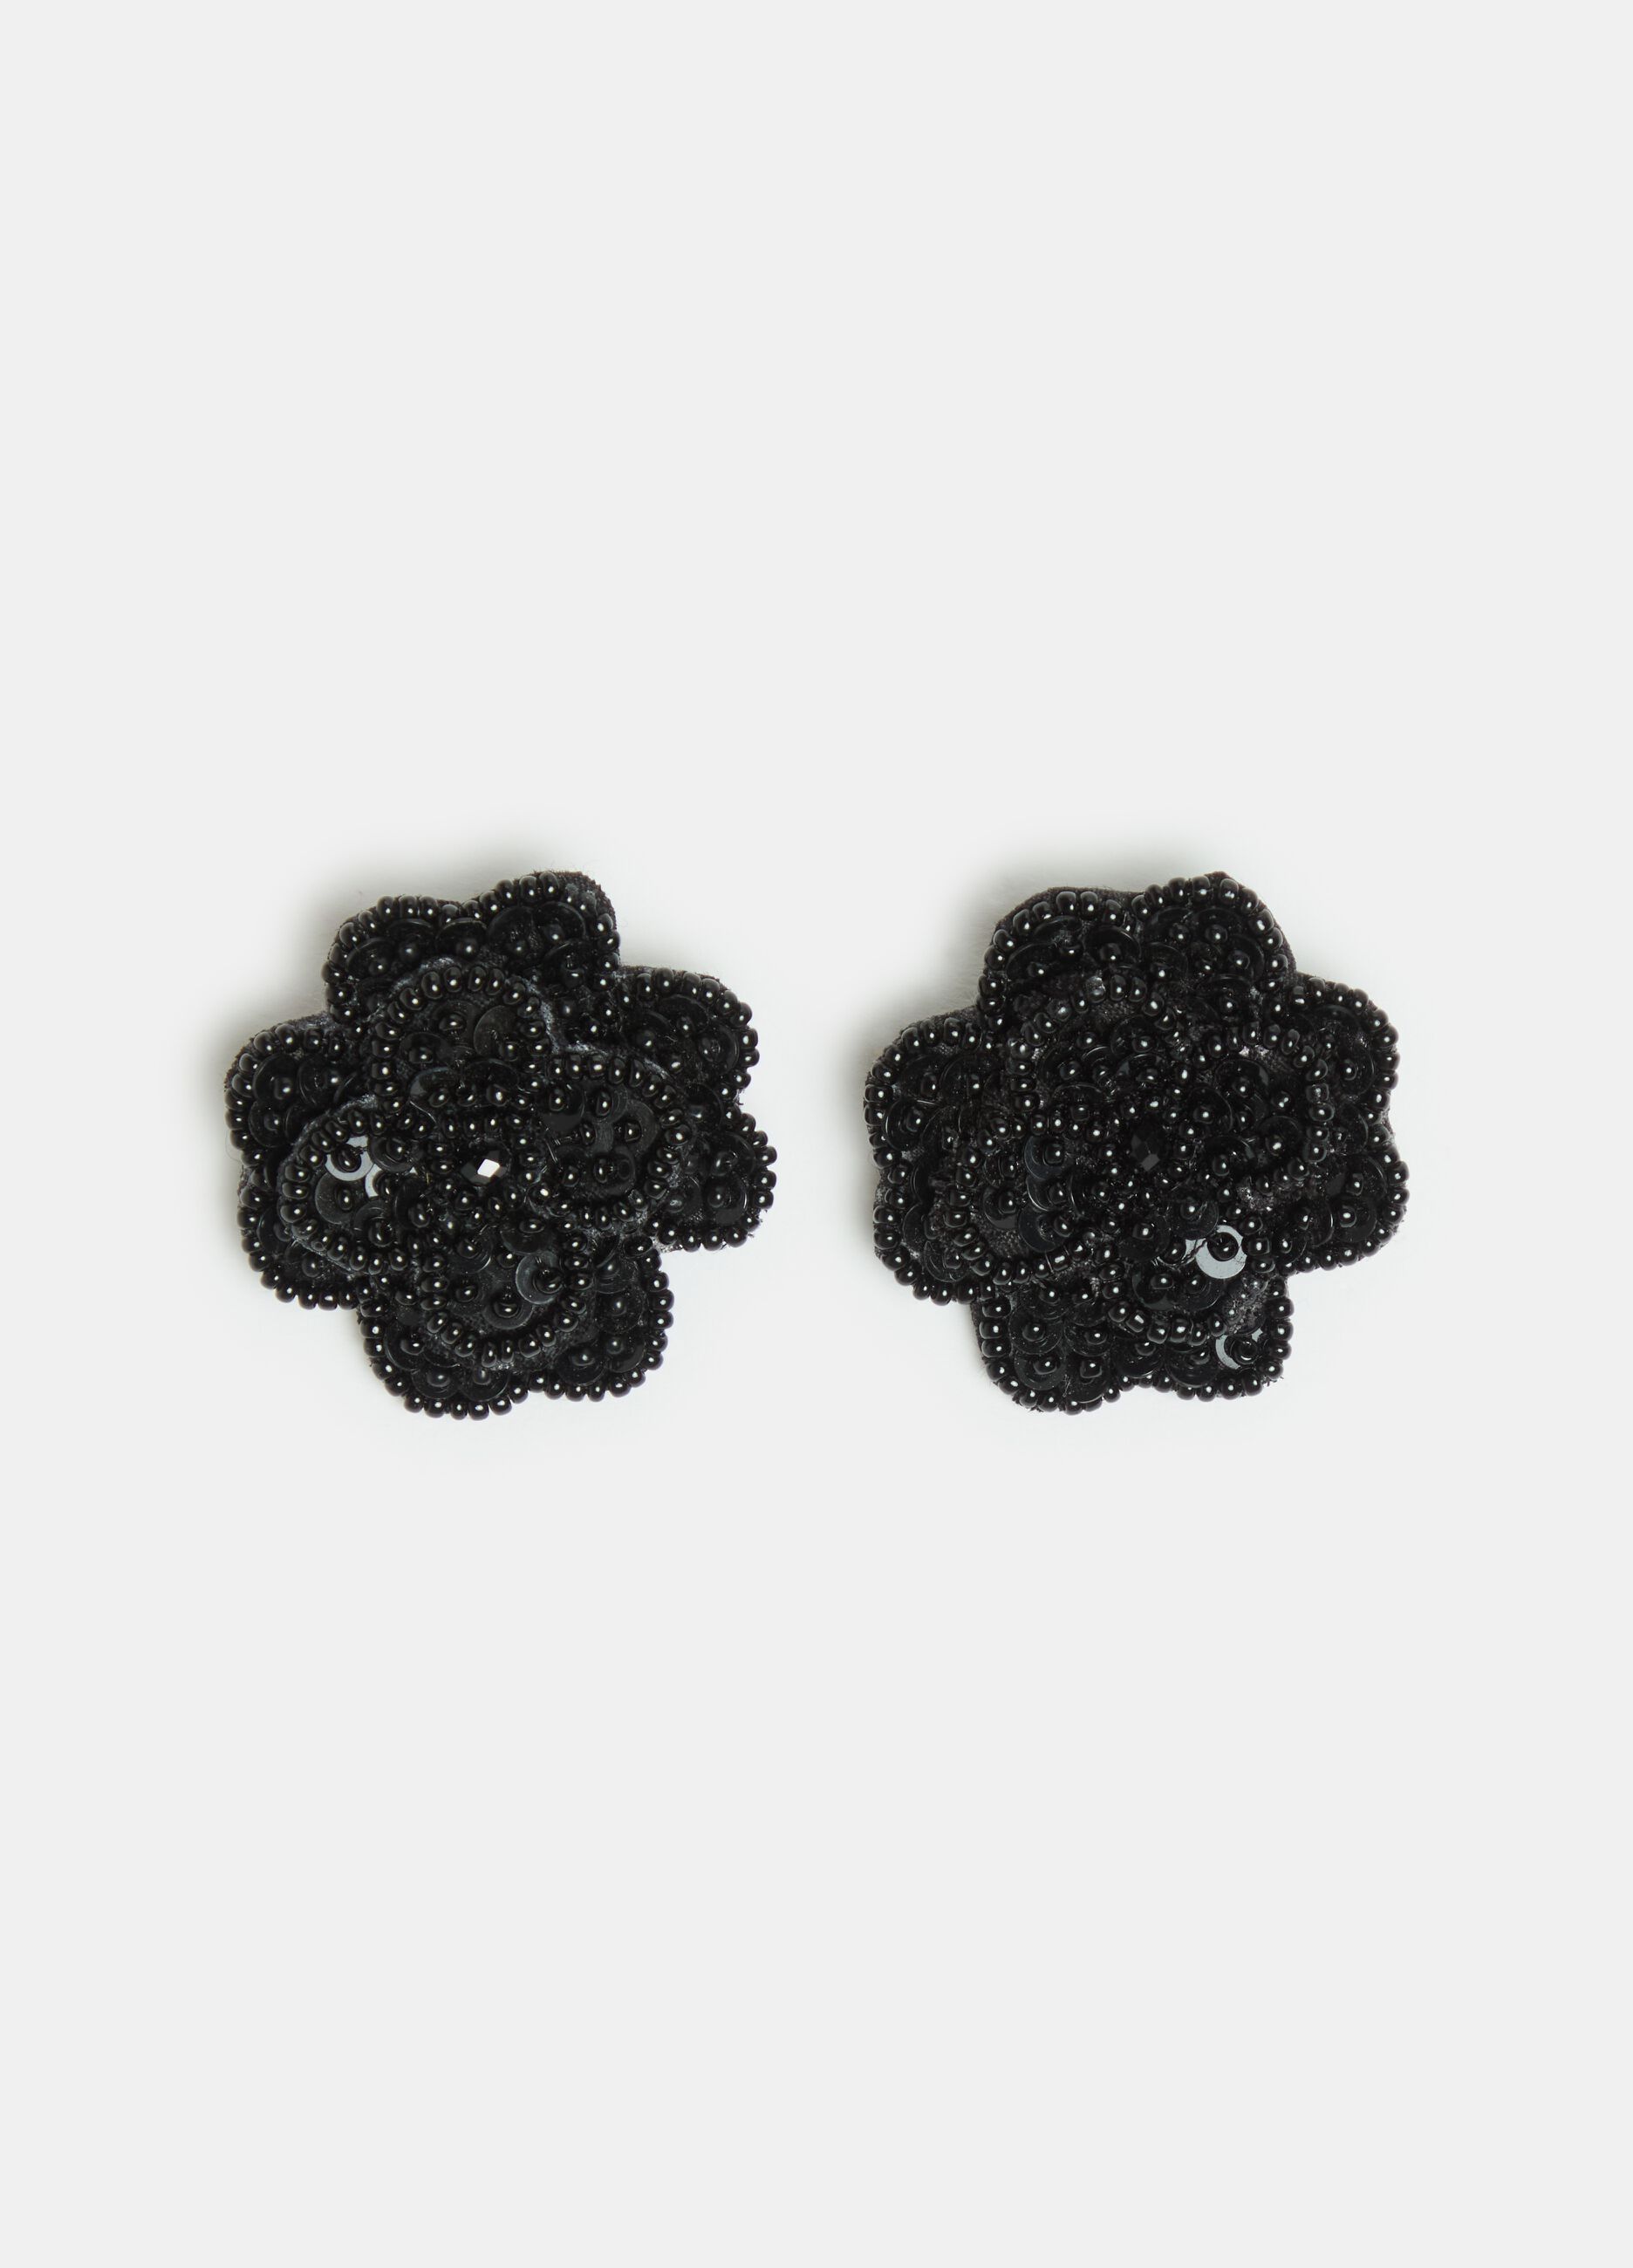 Flower earrings with beads